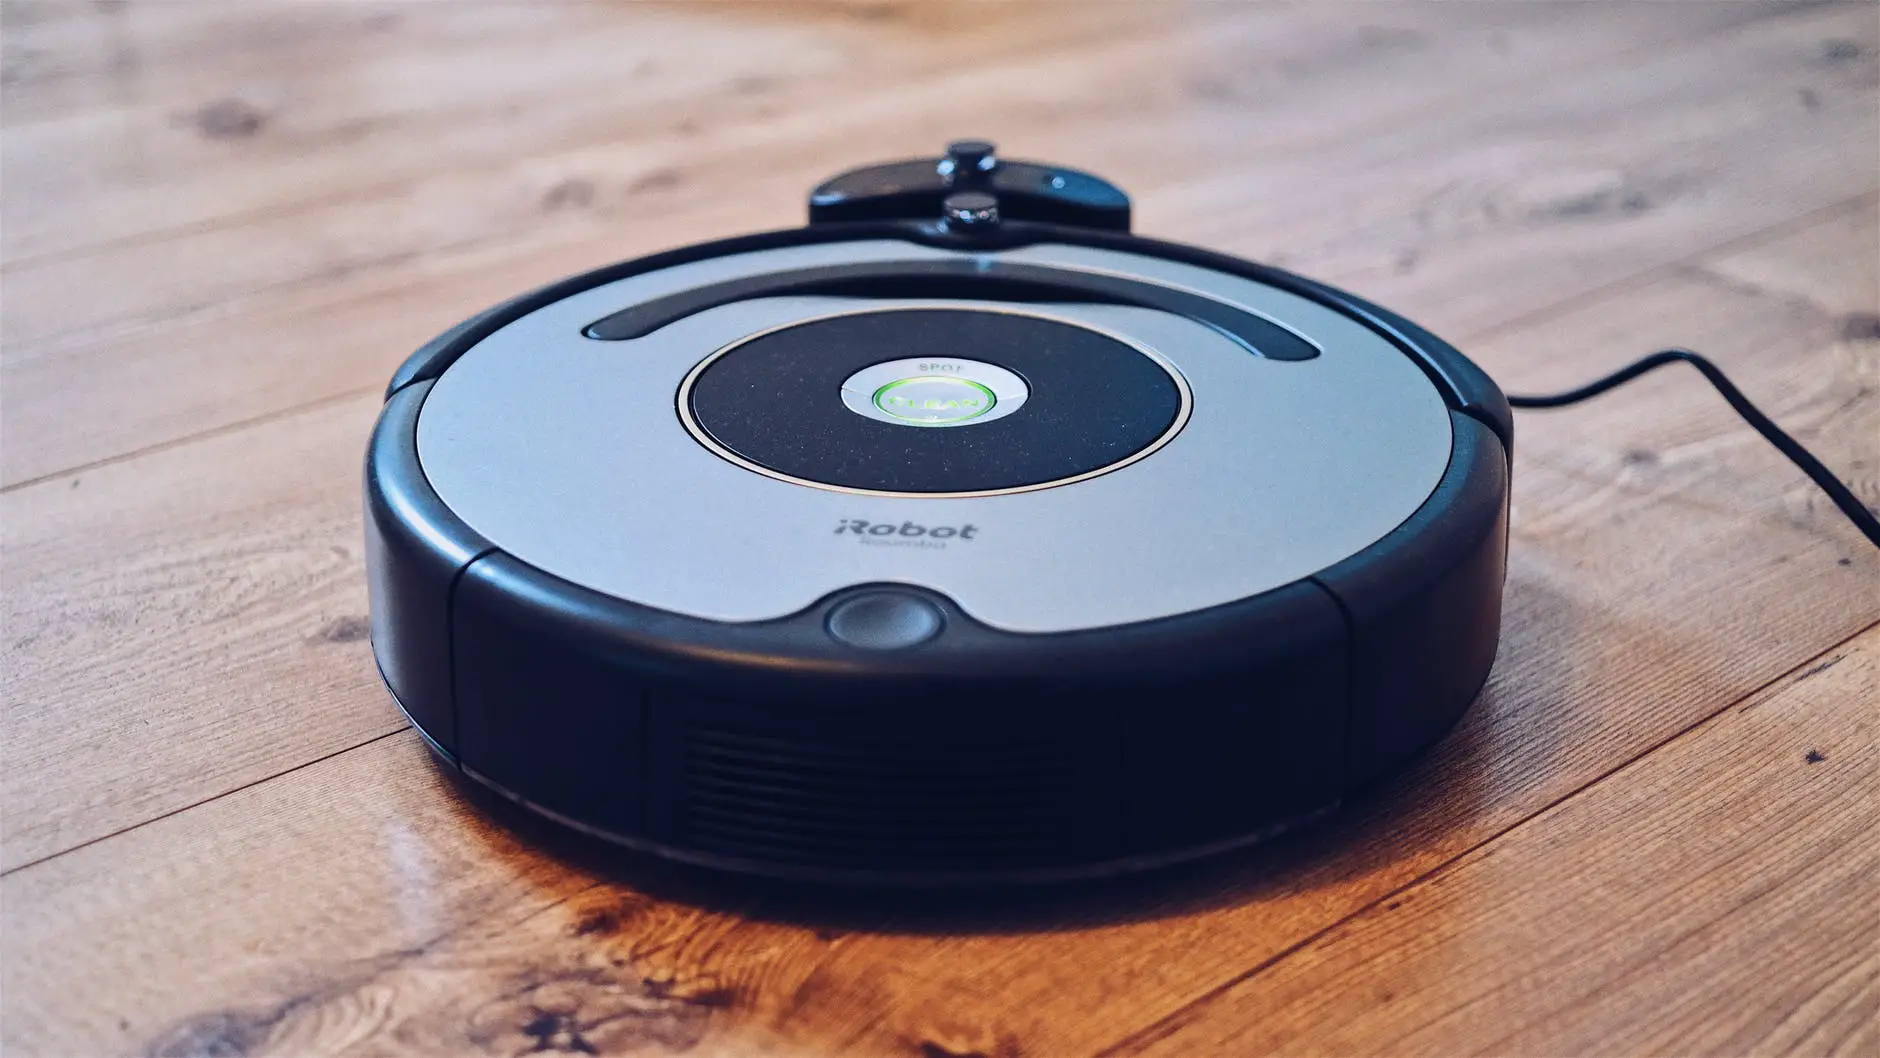 Roomba i7 vs Roborock S6 vs Deebot N79 – Which Offers Better Value for You?